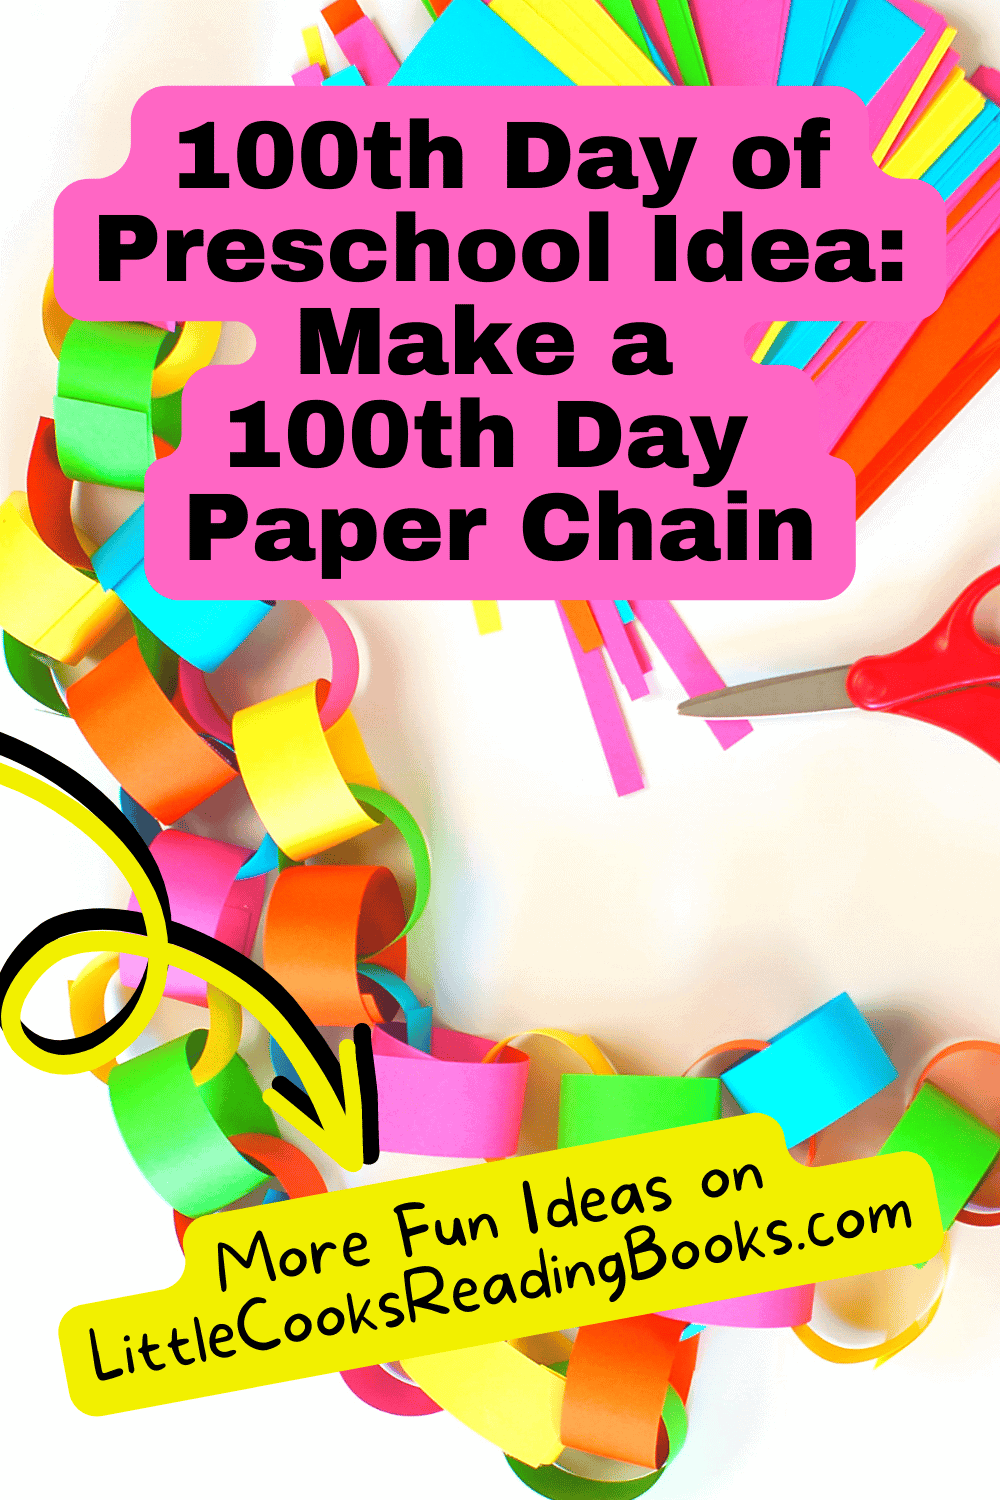 100th day preschool activities - make a 100 paper chain